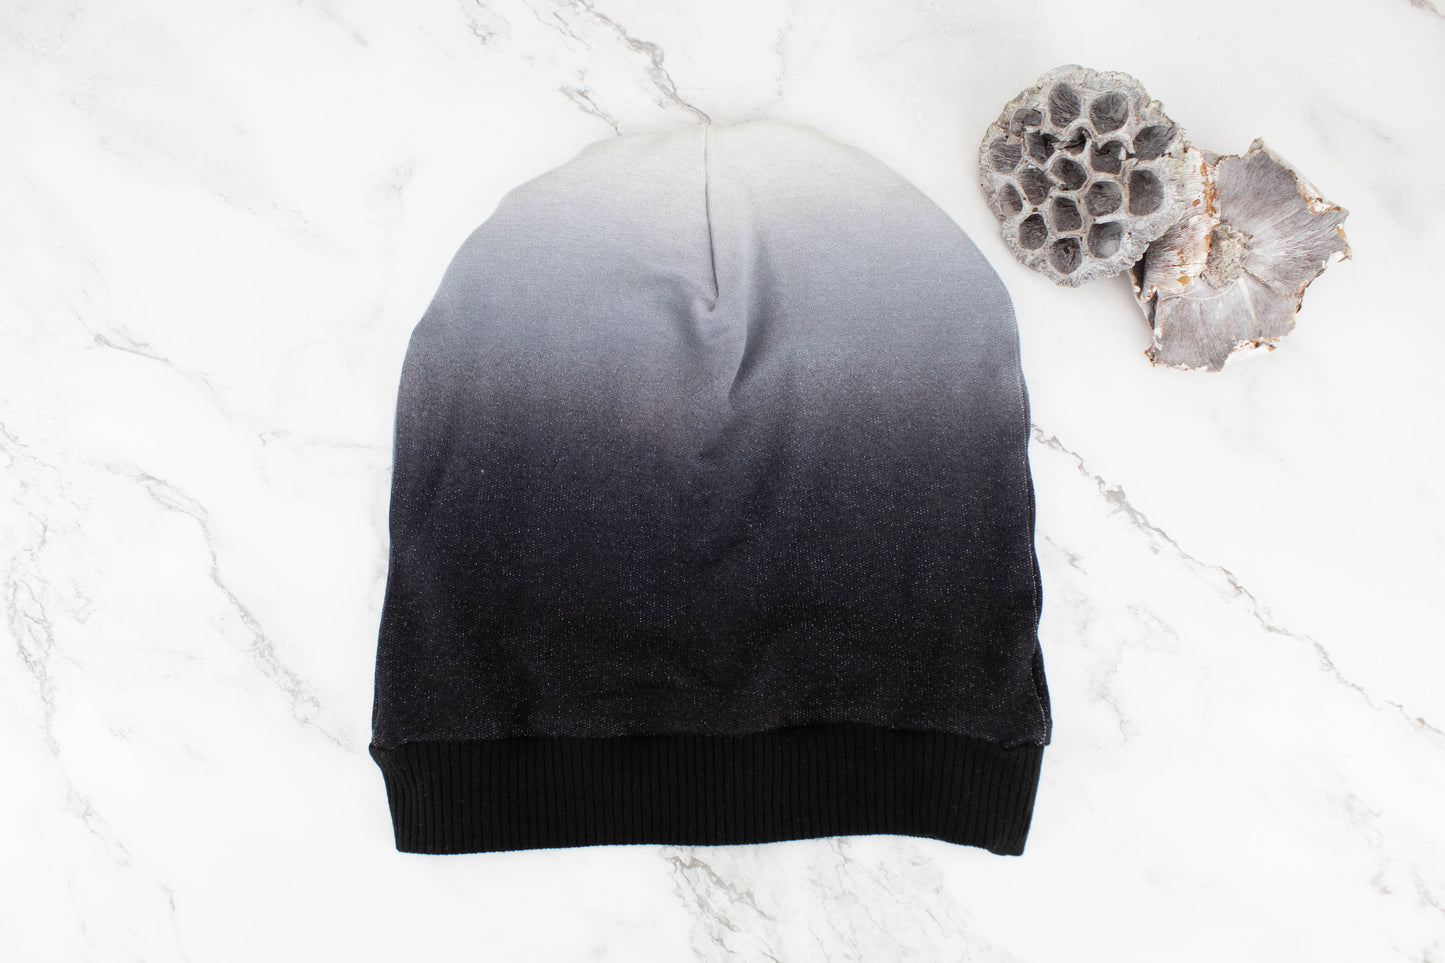 Black and Gray Ombre Slouchy Beanie